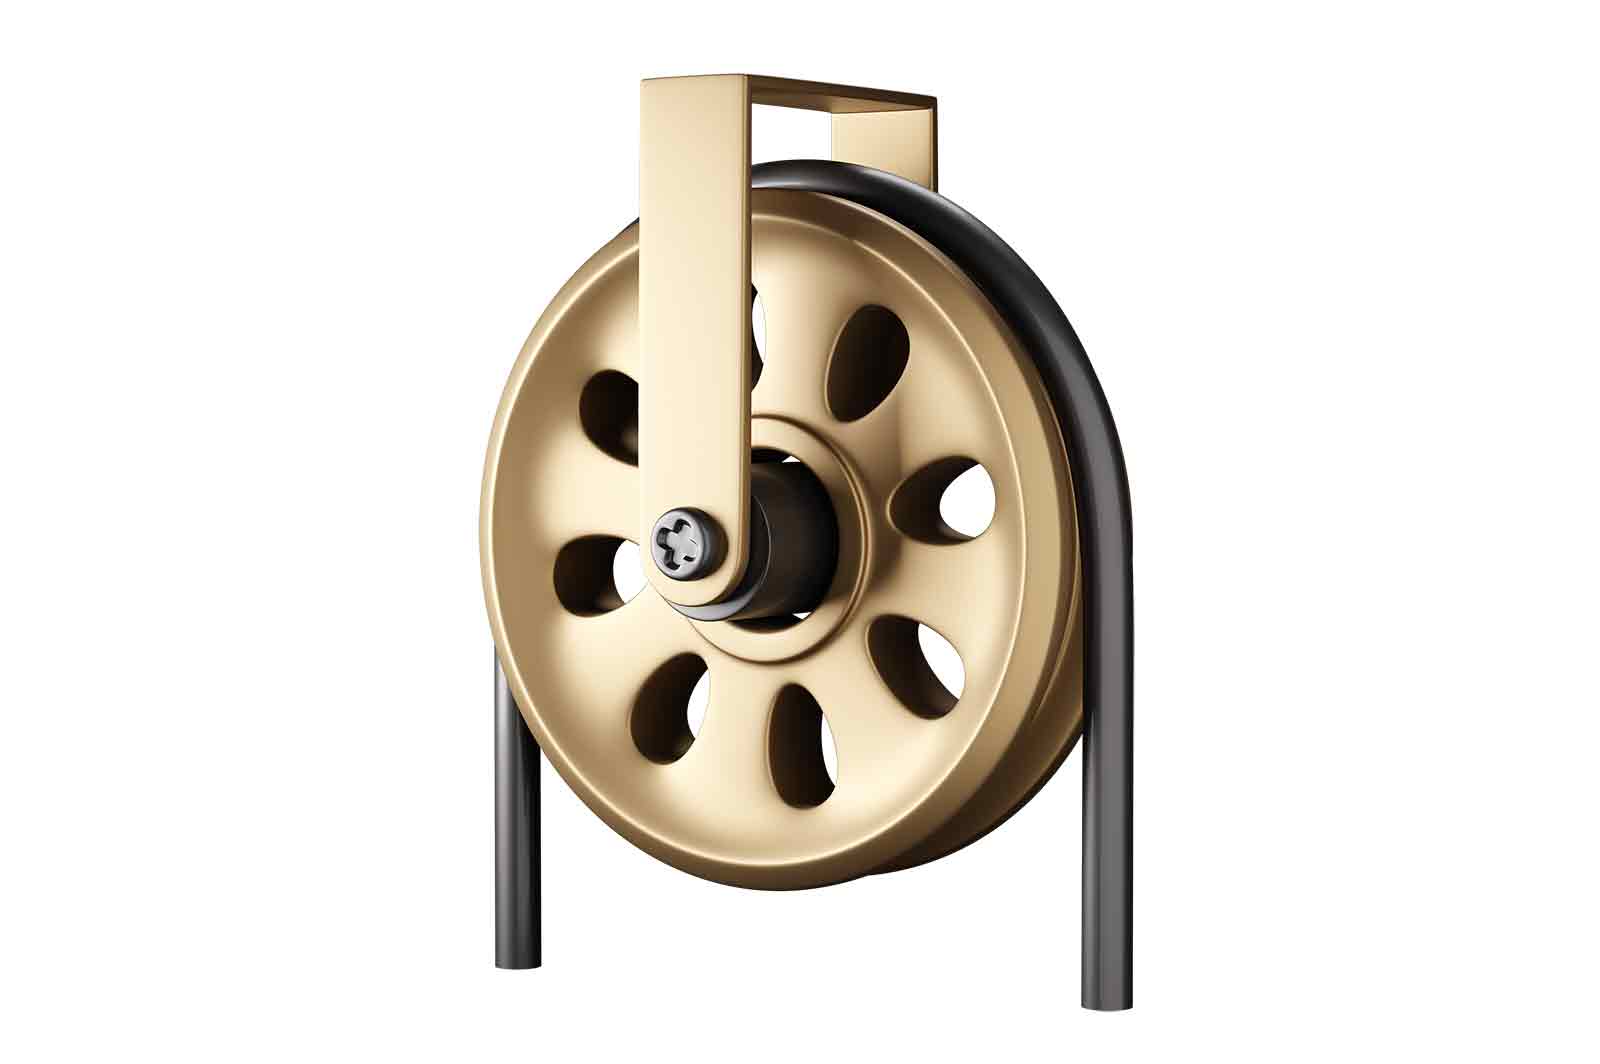 Abstract bronze round shaped metal detail 3d rendered illustration. Wheel component of single mechanism concept